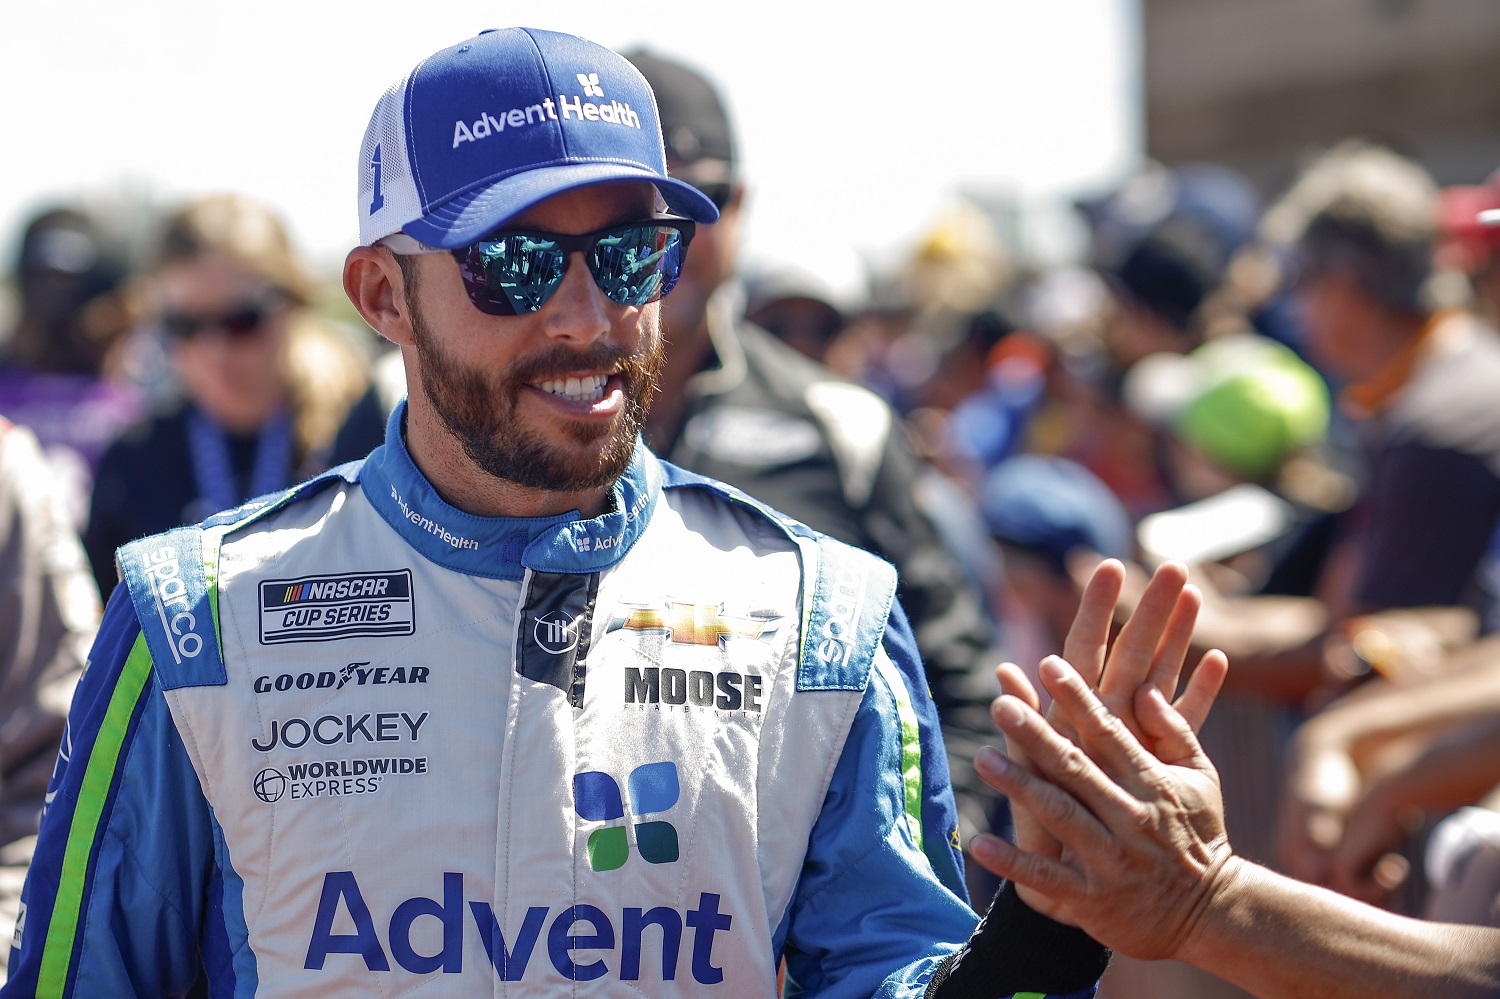 Ross Chastain greets NASCAR fans prior to the NASCAR Cup Series Hollywood Casino 400 at Kansas Speedway on Sept. 11, 2022.